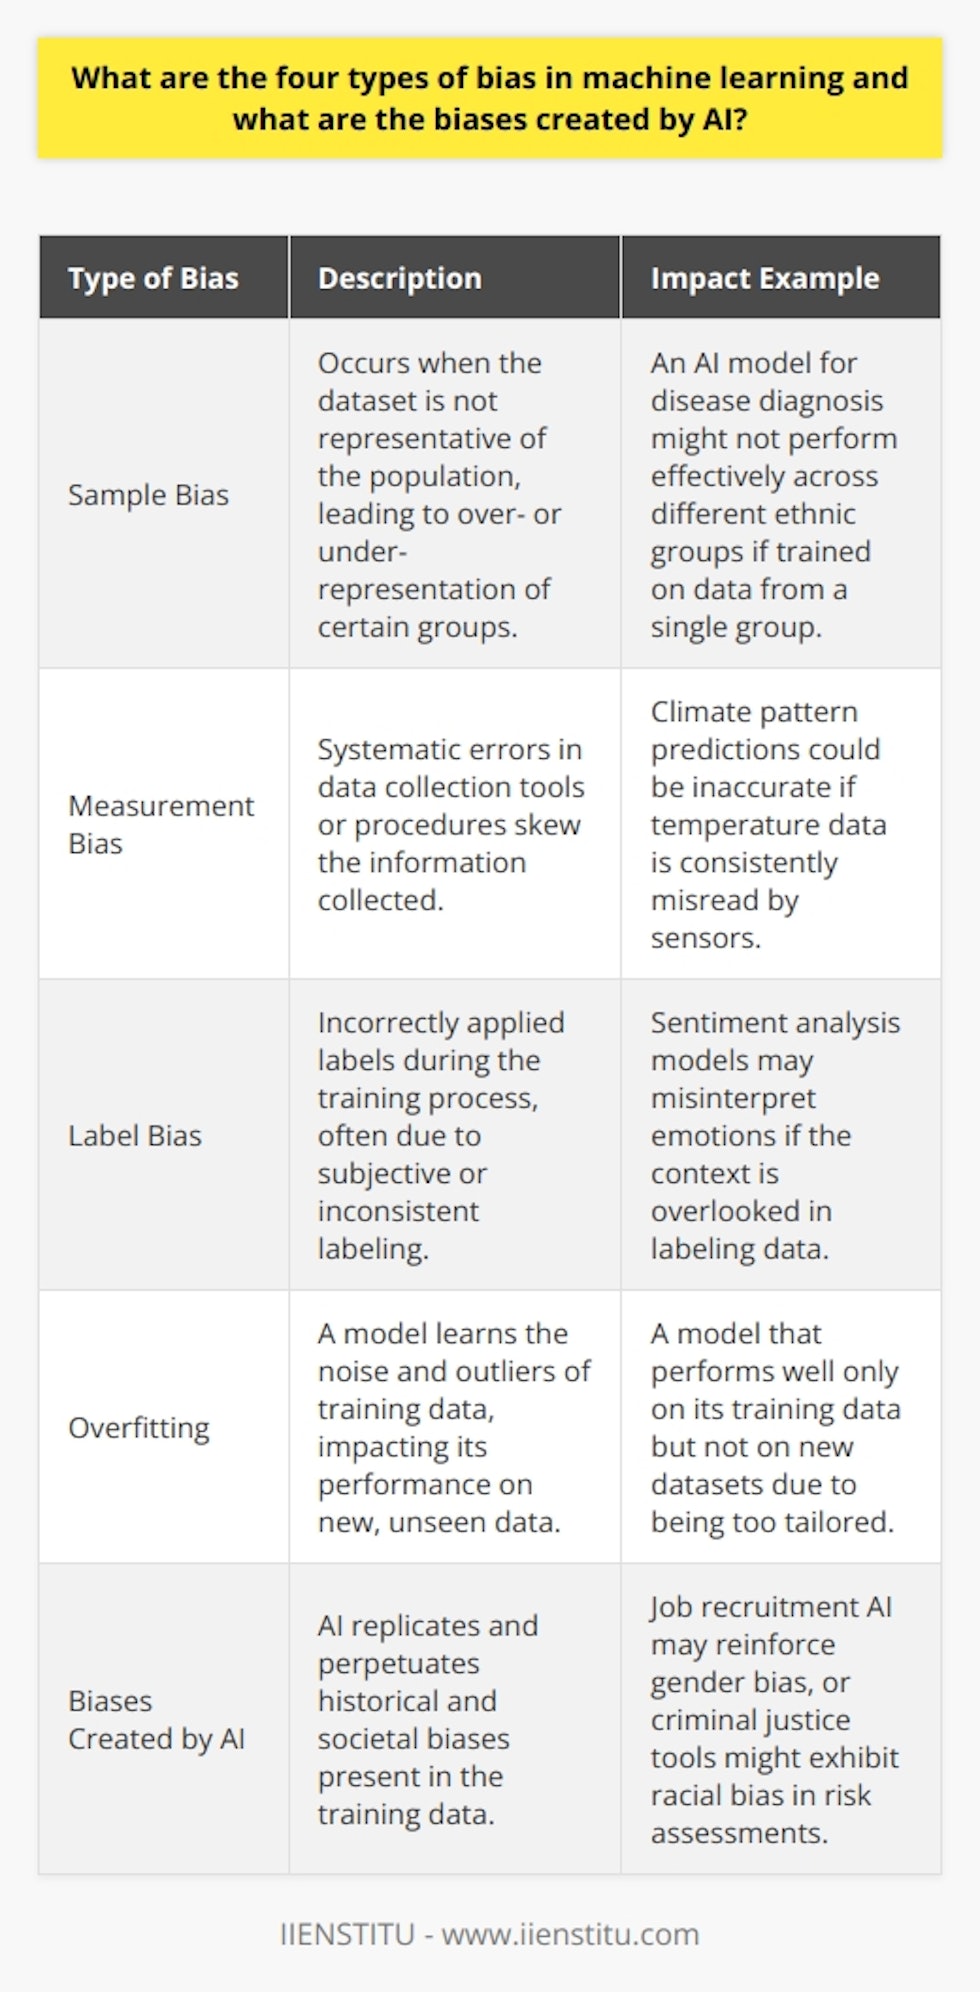 Machine learning algorithms are designed to make sense of and learn from data, but they can be affected by bias, which can lead to unfair or erroneous outcomes. Understanding these biases is critical in the development and deployment of equitable and effective AI systems. The following illustrates four common types of bias encountered in machine learning, as well as some of the biases that can arise from AI.### Sample BiasSample bias is one of the primary culprits when an AI model fails to generalize well from its training data to the broader population. This occurs when the training set is not a representative sample of the domain of interest; certain groups or scenarios may be over- or under-represented. For example, if an AI model developed for disease diagnosis is trained predominantly on data from one ethnic group, it may not perform as well for others.### Measurement BiasWhen data collection tools or procedures are flawed, measurement bias can infiltrate the dataset. This type of bias reflects systematic errors in the way that information is collected. For instance, if a sensor consistently misreads temperatures by a few degrees, the resulting temperature-related data fed into a machine learning system will be biased and might impact predictions relating to climate patterns or equipment performance.### Label BiasLabel bias occurs when the labels used for training data are incorrectly applied, which often results from subjective or inconsistent labeling processes. In sentiment analysis, for example, the range of human emotion can be complex and interpreting sentiment requires context that may be missed or misinterpreted, leading to a mislabeled dataset. This significantly affects the supervised learning in machine learning models because they rely heavily on accurate, high-quality labels.### OverfittingOverfitting is a form of model bias that happens when an algorithm learns not only the underlying patterns in the training data but also its noise and outliers, which should not generalize to new data. This causes the model to perform exceptionally well on its training data but poorly on any data it hasn't seen before. It's essentially the model becoming too tailored to one specific set of data.### Biases Created by AIAI can create biases in various ways, largely as a reflection of the historical data and societal biases baked into that data. In job recruitment tools, for example, historical hiring data might show a preference for a certain gender in specific roles. When AI is applied to this data to screen candidates, it may perpetuate that gender bias.In the criminal justice system, machine-learning models might be employed to assess the risk of reoffending. If the training data reflects historical biases against a particular ethnic group, the AI could unfairly judge individuals from that group as higher risk.Additionally, facial recognition technologies have been documented to have lower accuracy rates for people of color, largely due to the lack of diversity in the training datasets. This can lead to misidentification and discrimination in various settings, from law enforcement to commercial applications.Addressing these biases is a multi-faceted challenge that involves careful data collection, robust model evaluation, and a continual process of monitoring and improvement. Stakeholders in AI – from data scientists to policymakers – must collaborate to ensure that systems are transparent, accountable, and as unbiased as possible. By cultivating awareness and developing methodologies for mitigating bias, we can strive for AI that contributes positively to society and is equitable for all.